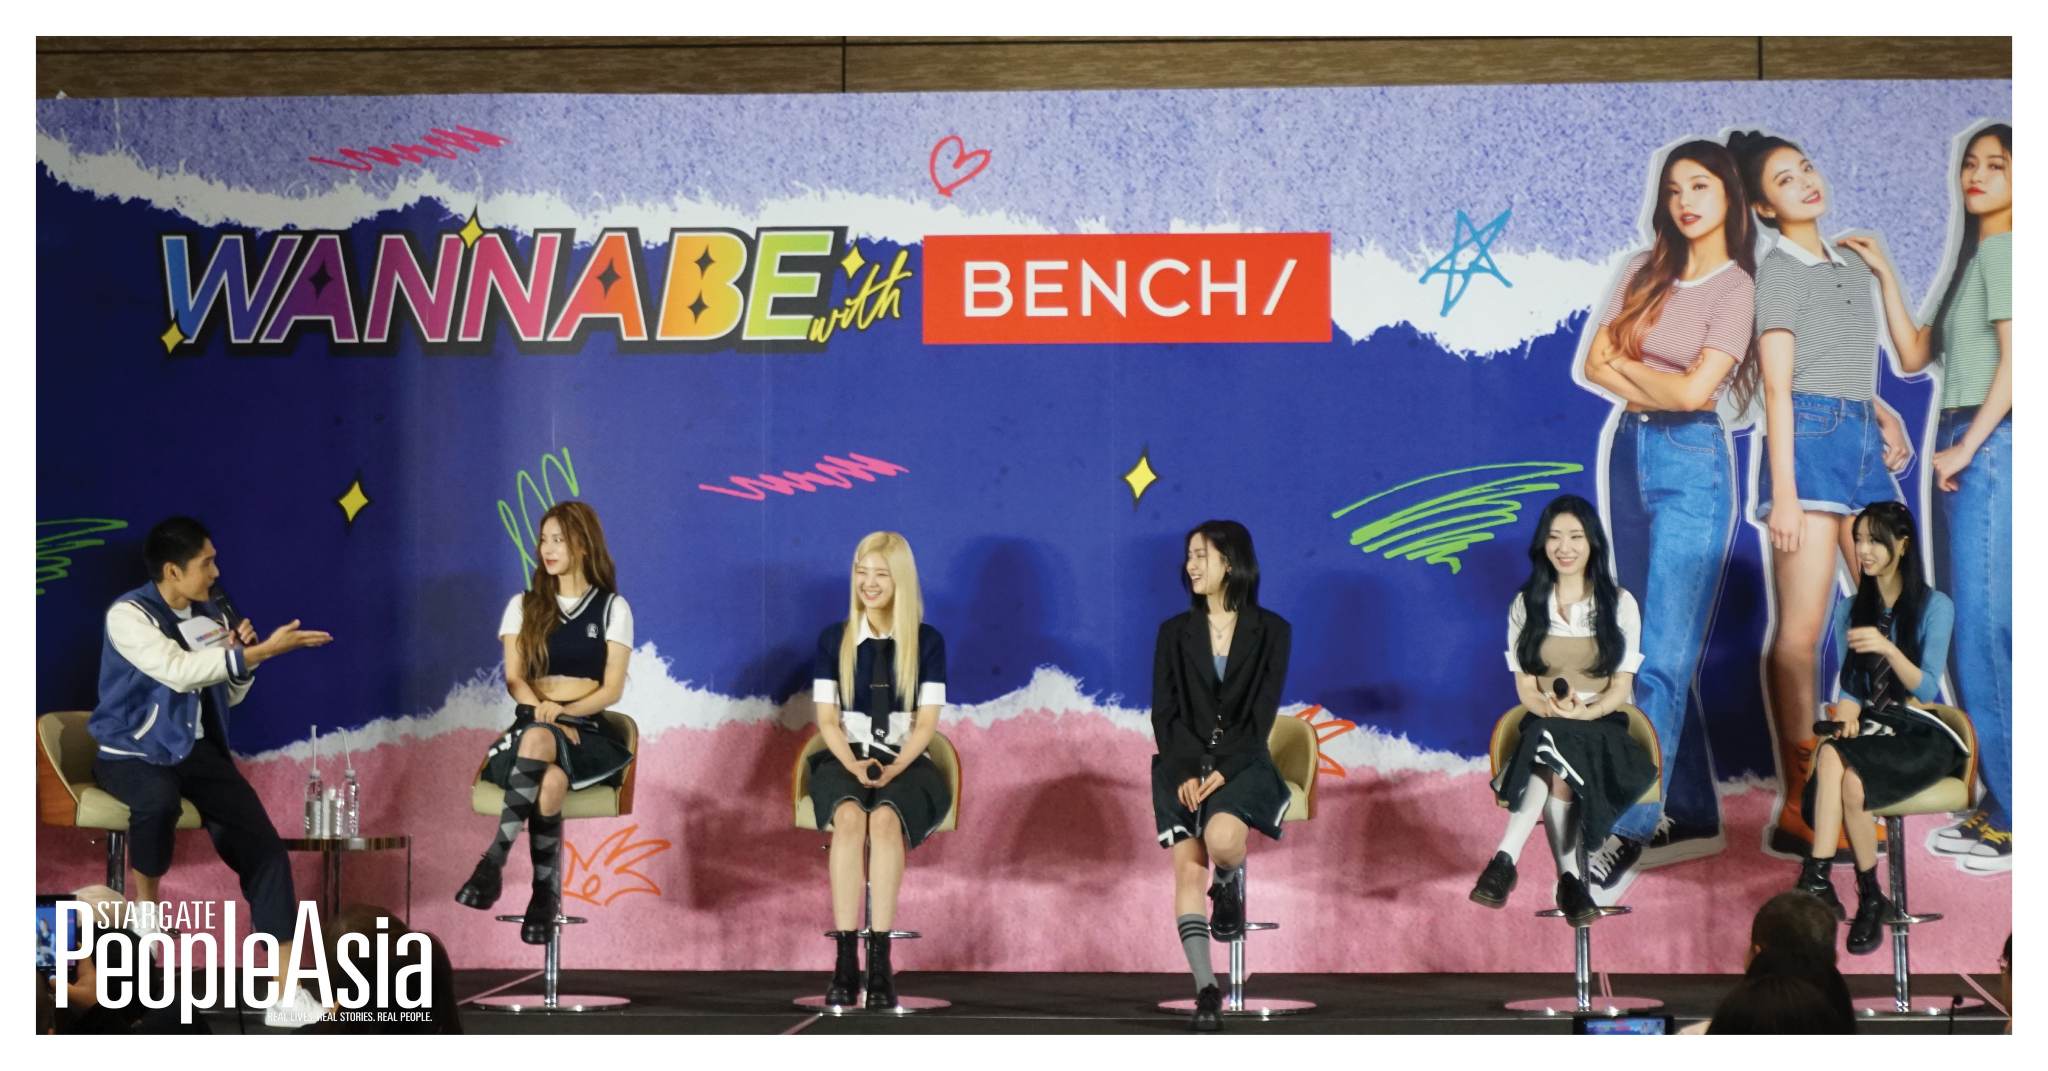 Itzy keeps it “icy” for upcoming Bench fan meet in Manila